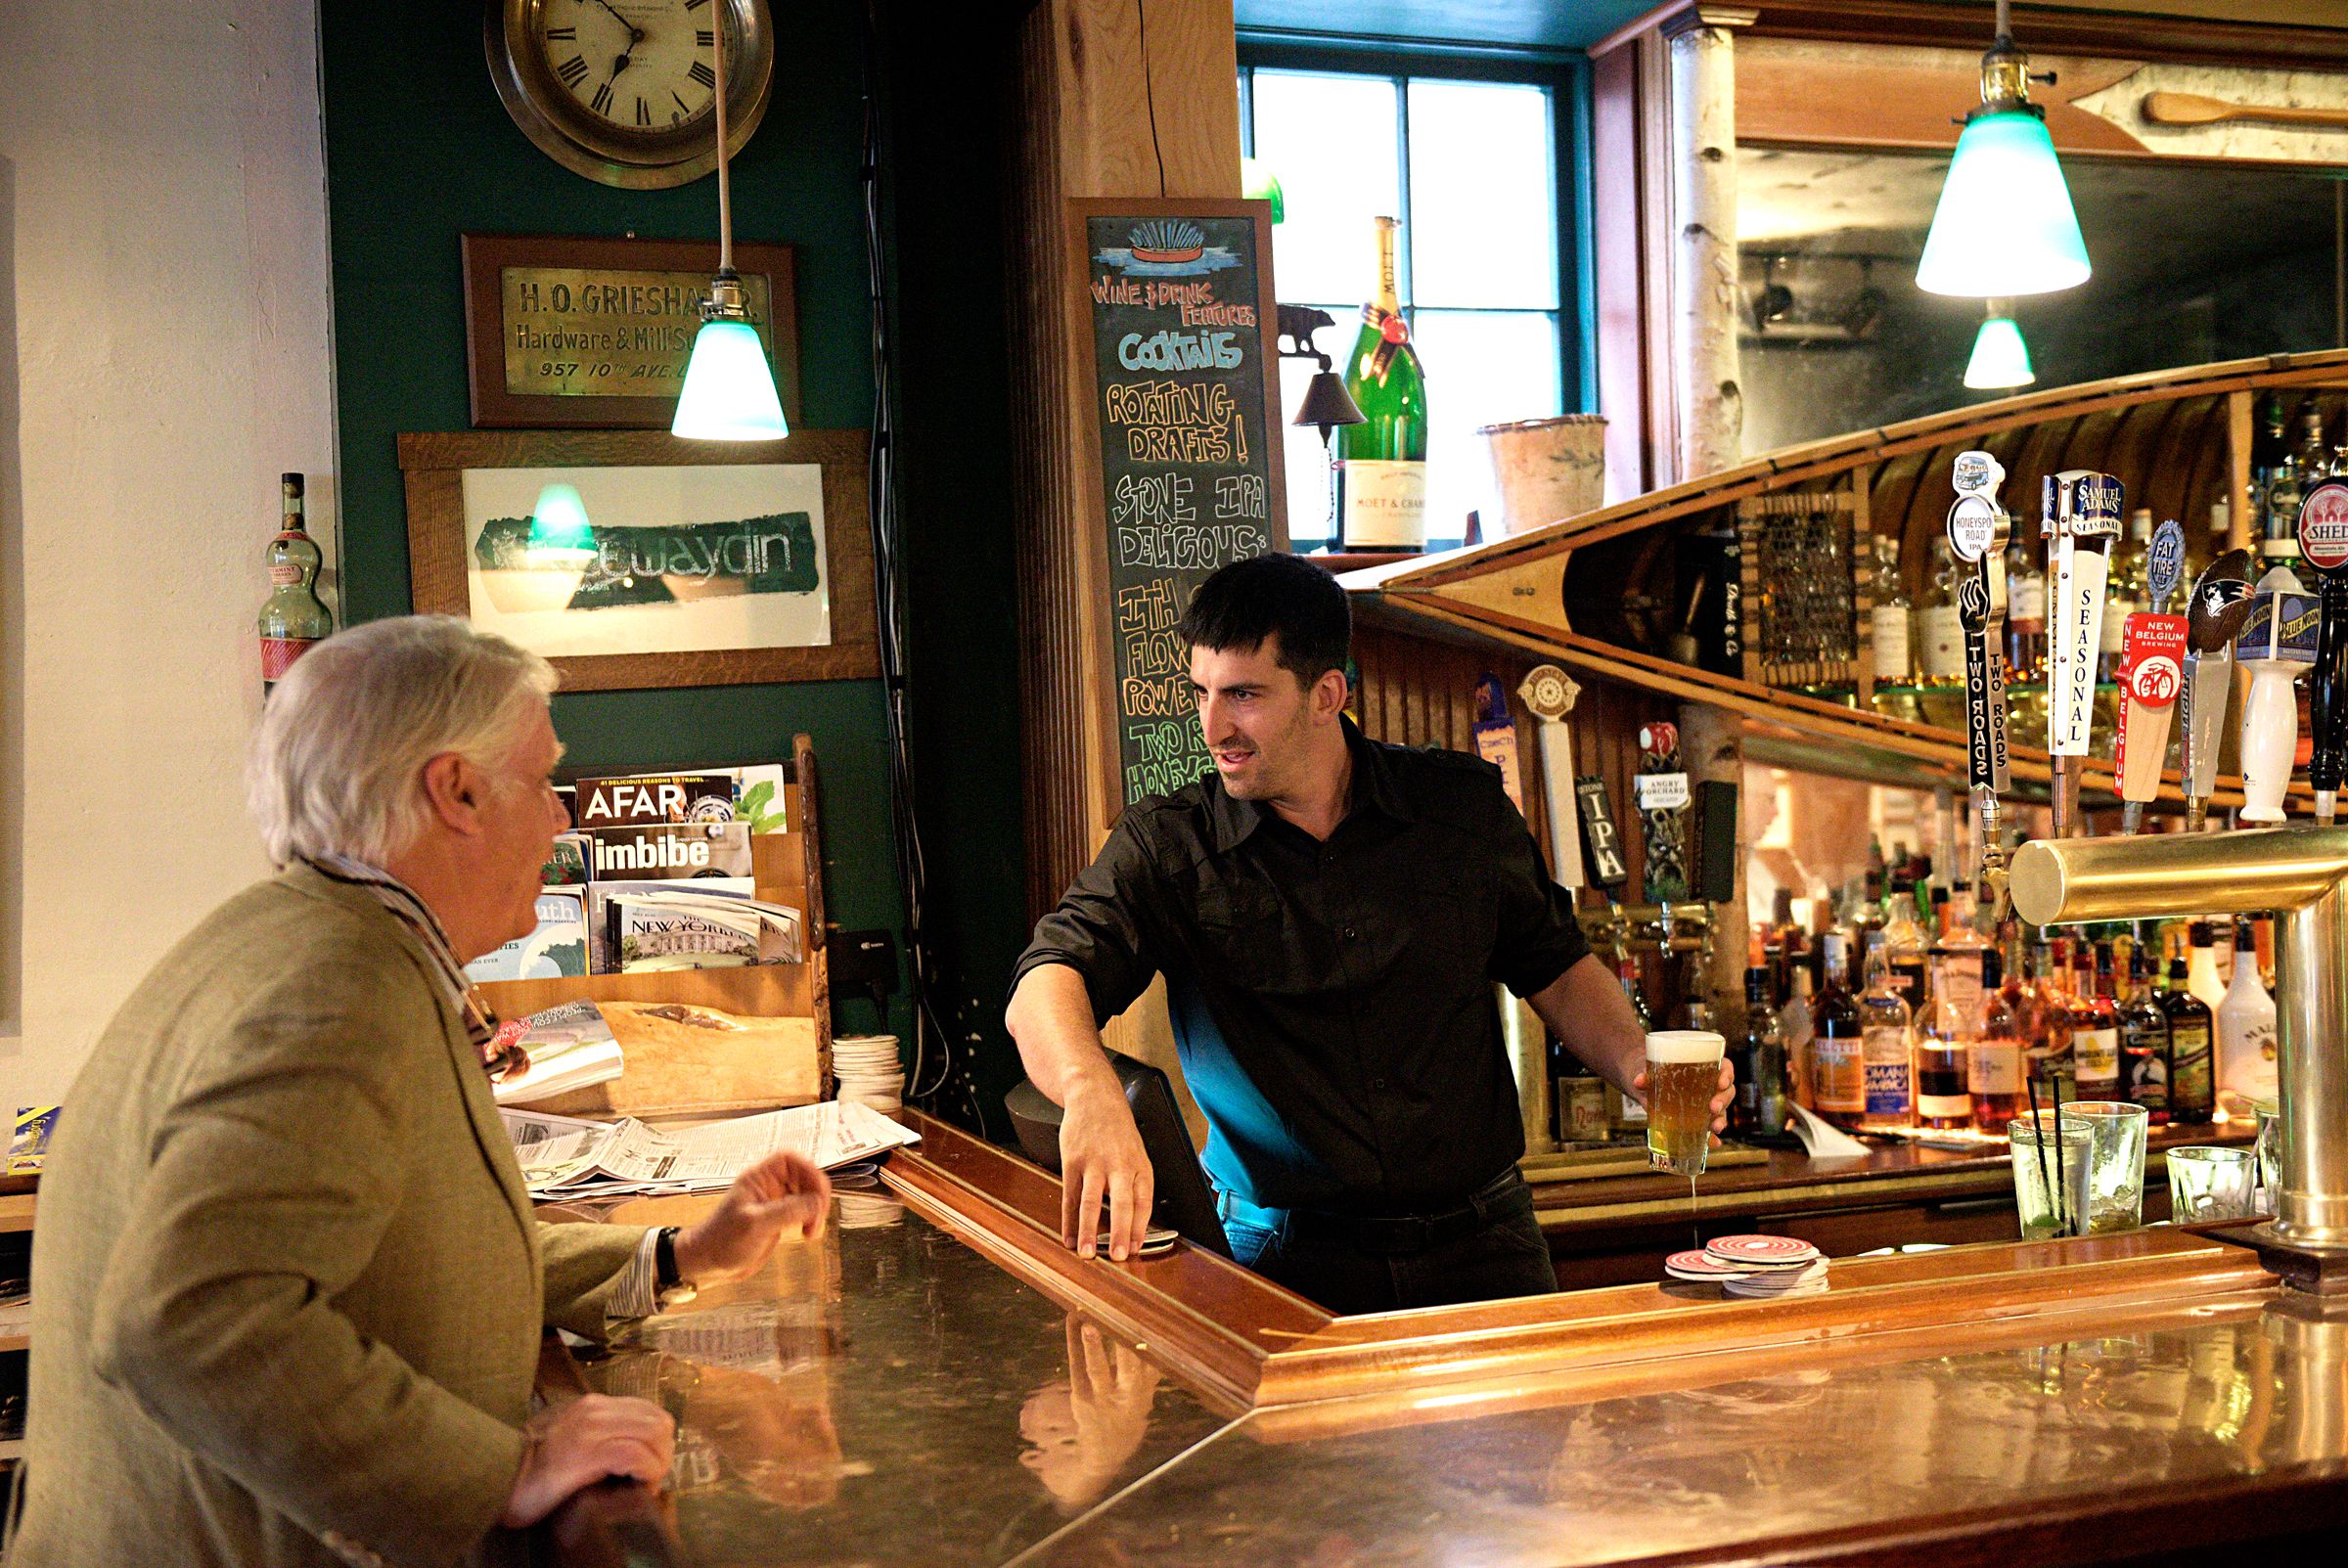 After over 13 years at the helm of the Canoe Club in Hanover, N.H., John Chapin, left, has sold the restaurant and bar to to bartender Daniel Levitt, right, who has been on staff since the establishment opened in 2003. Chapin talks with Levitt between at the bar in Hanover, N.H. Friday, July 14,2 017. (Valley News - James M. Patterson) Copyright Valley News. May not be reprinted or used online without permission. Send requests to permission@vnews.com.